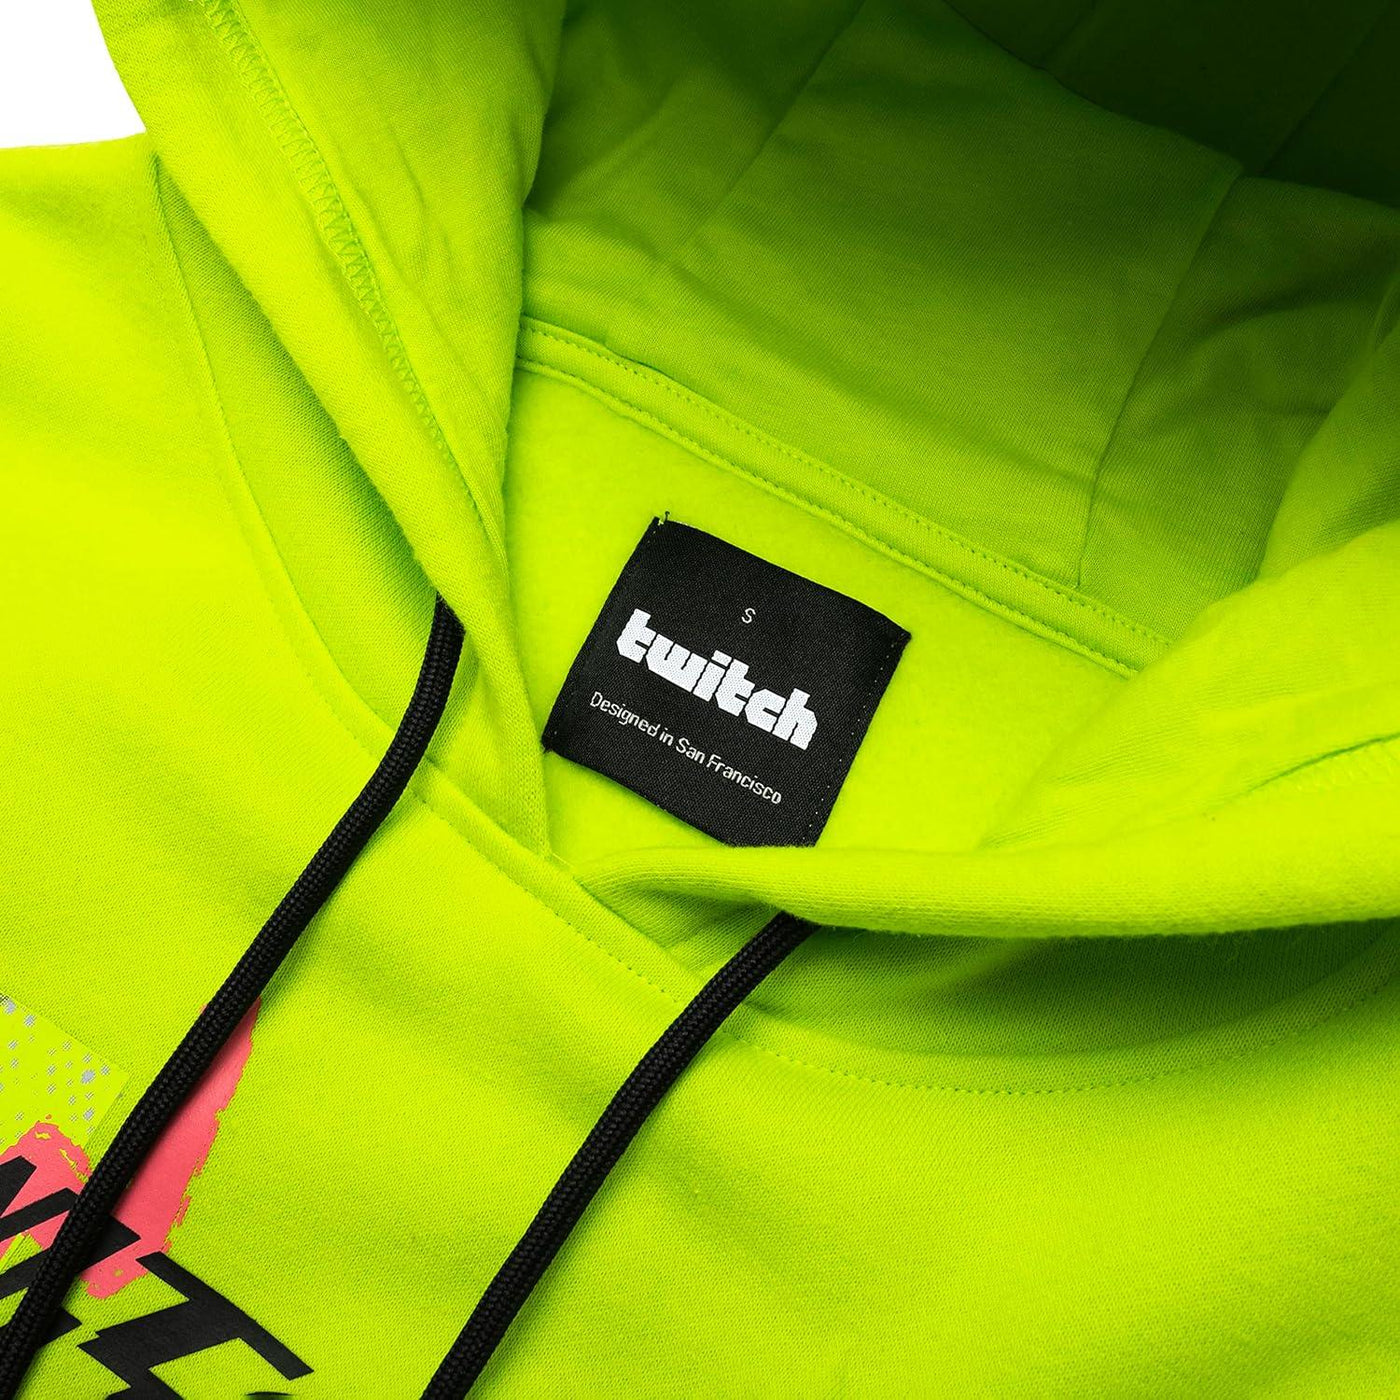 Twitch Hoodie Sweatshirt Green hooded with Print on Both Sides - Massive Discounts